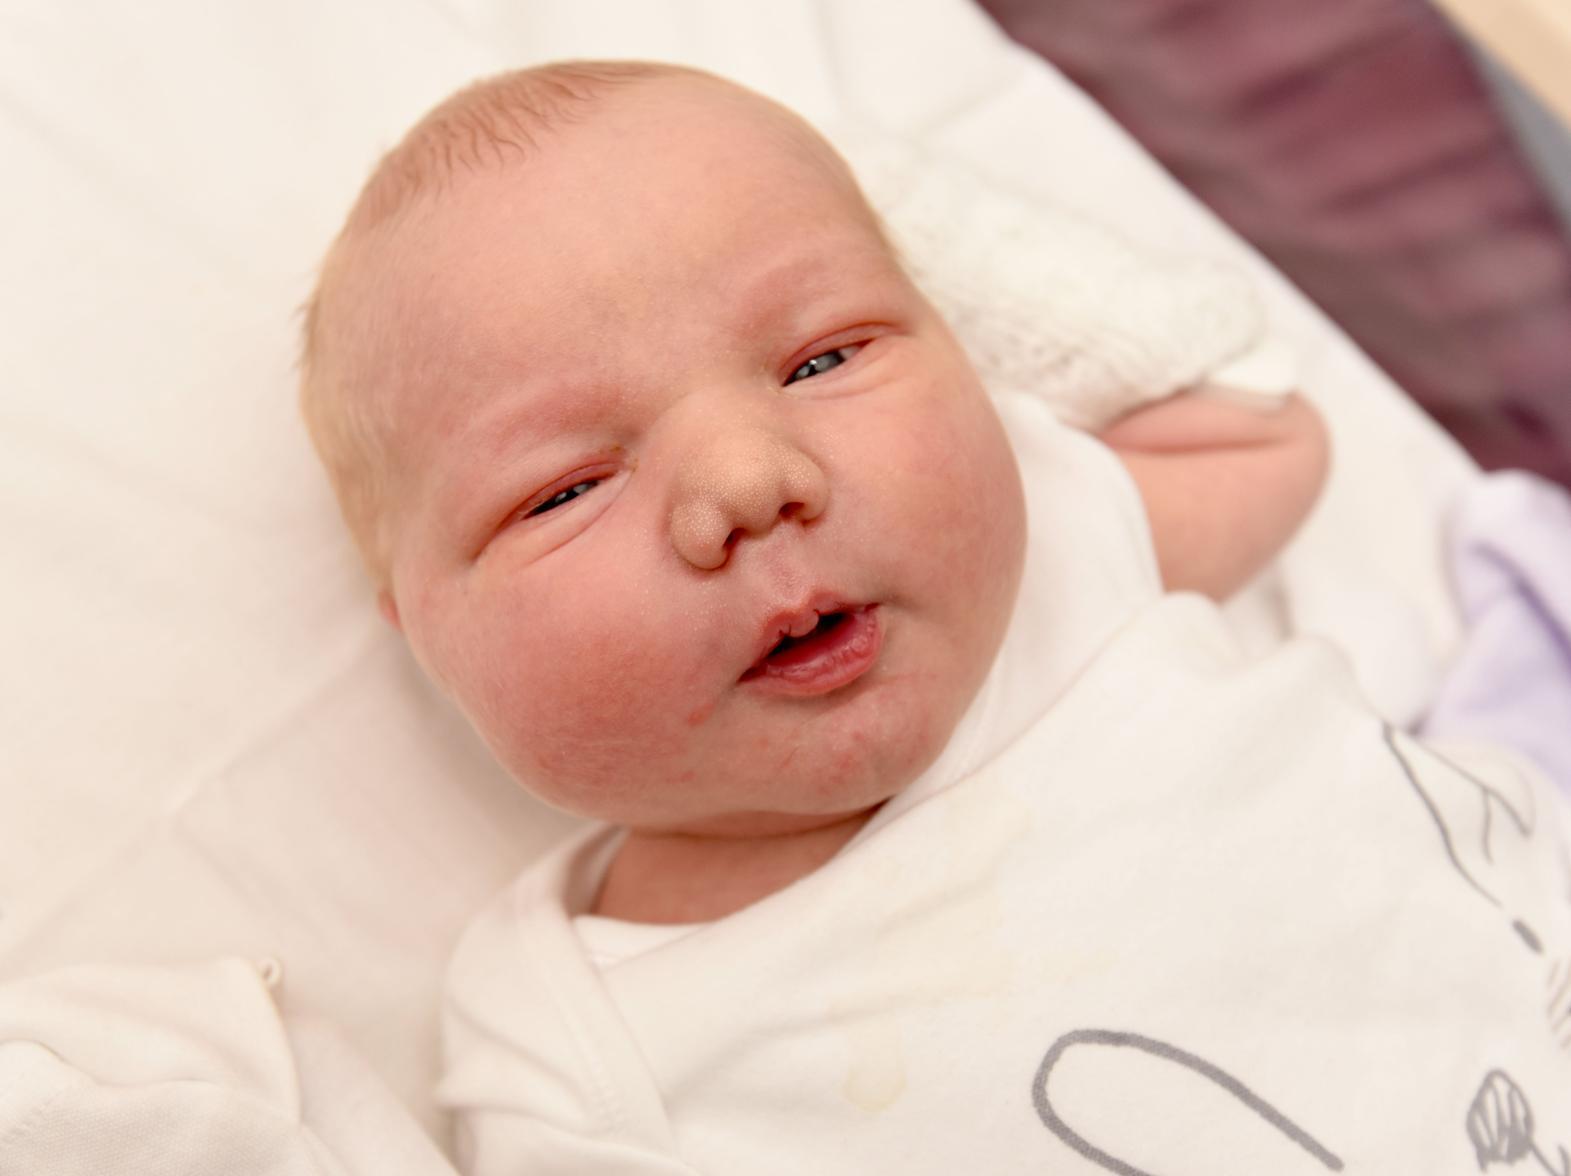 Jack Edward Robson was born on January 4 at 5.22pm, weighing 9lb 15oz, to Lucy Chandler and Nick Robson, from Walton Le Dale